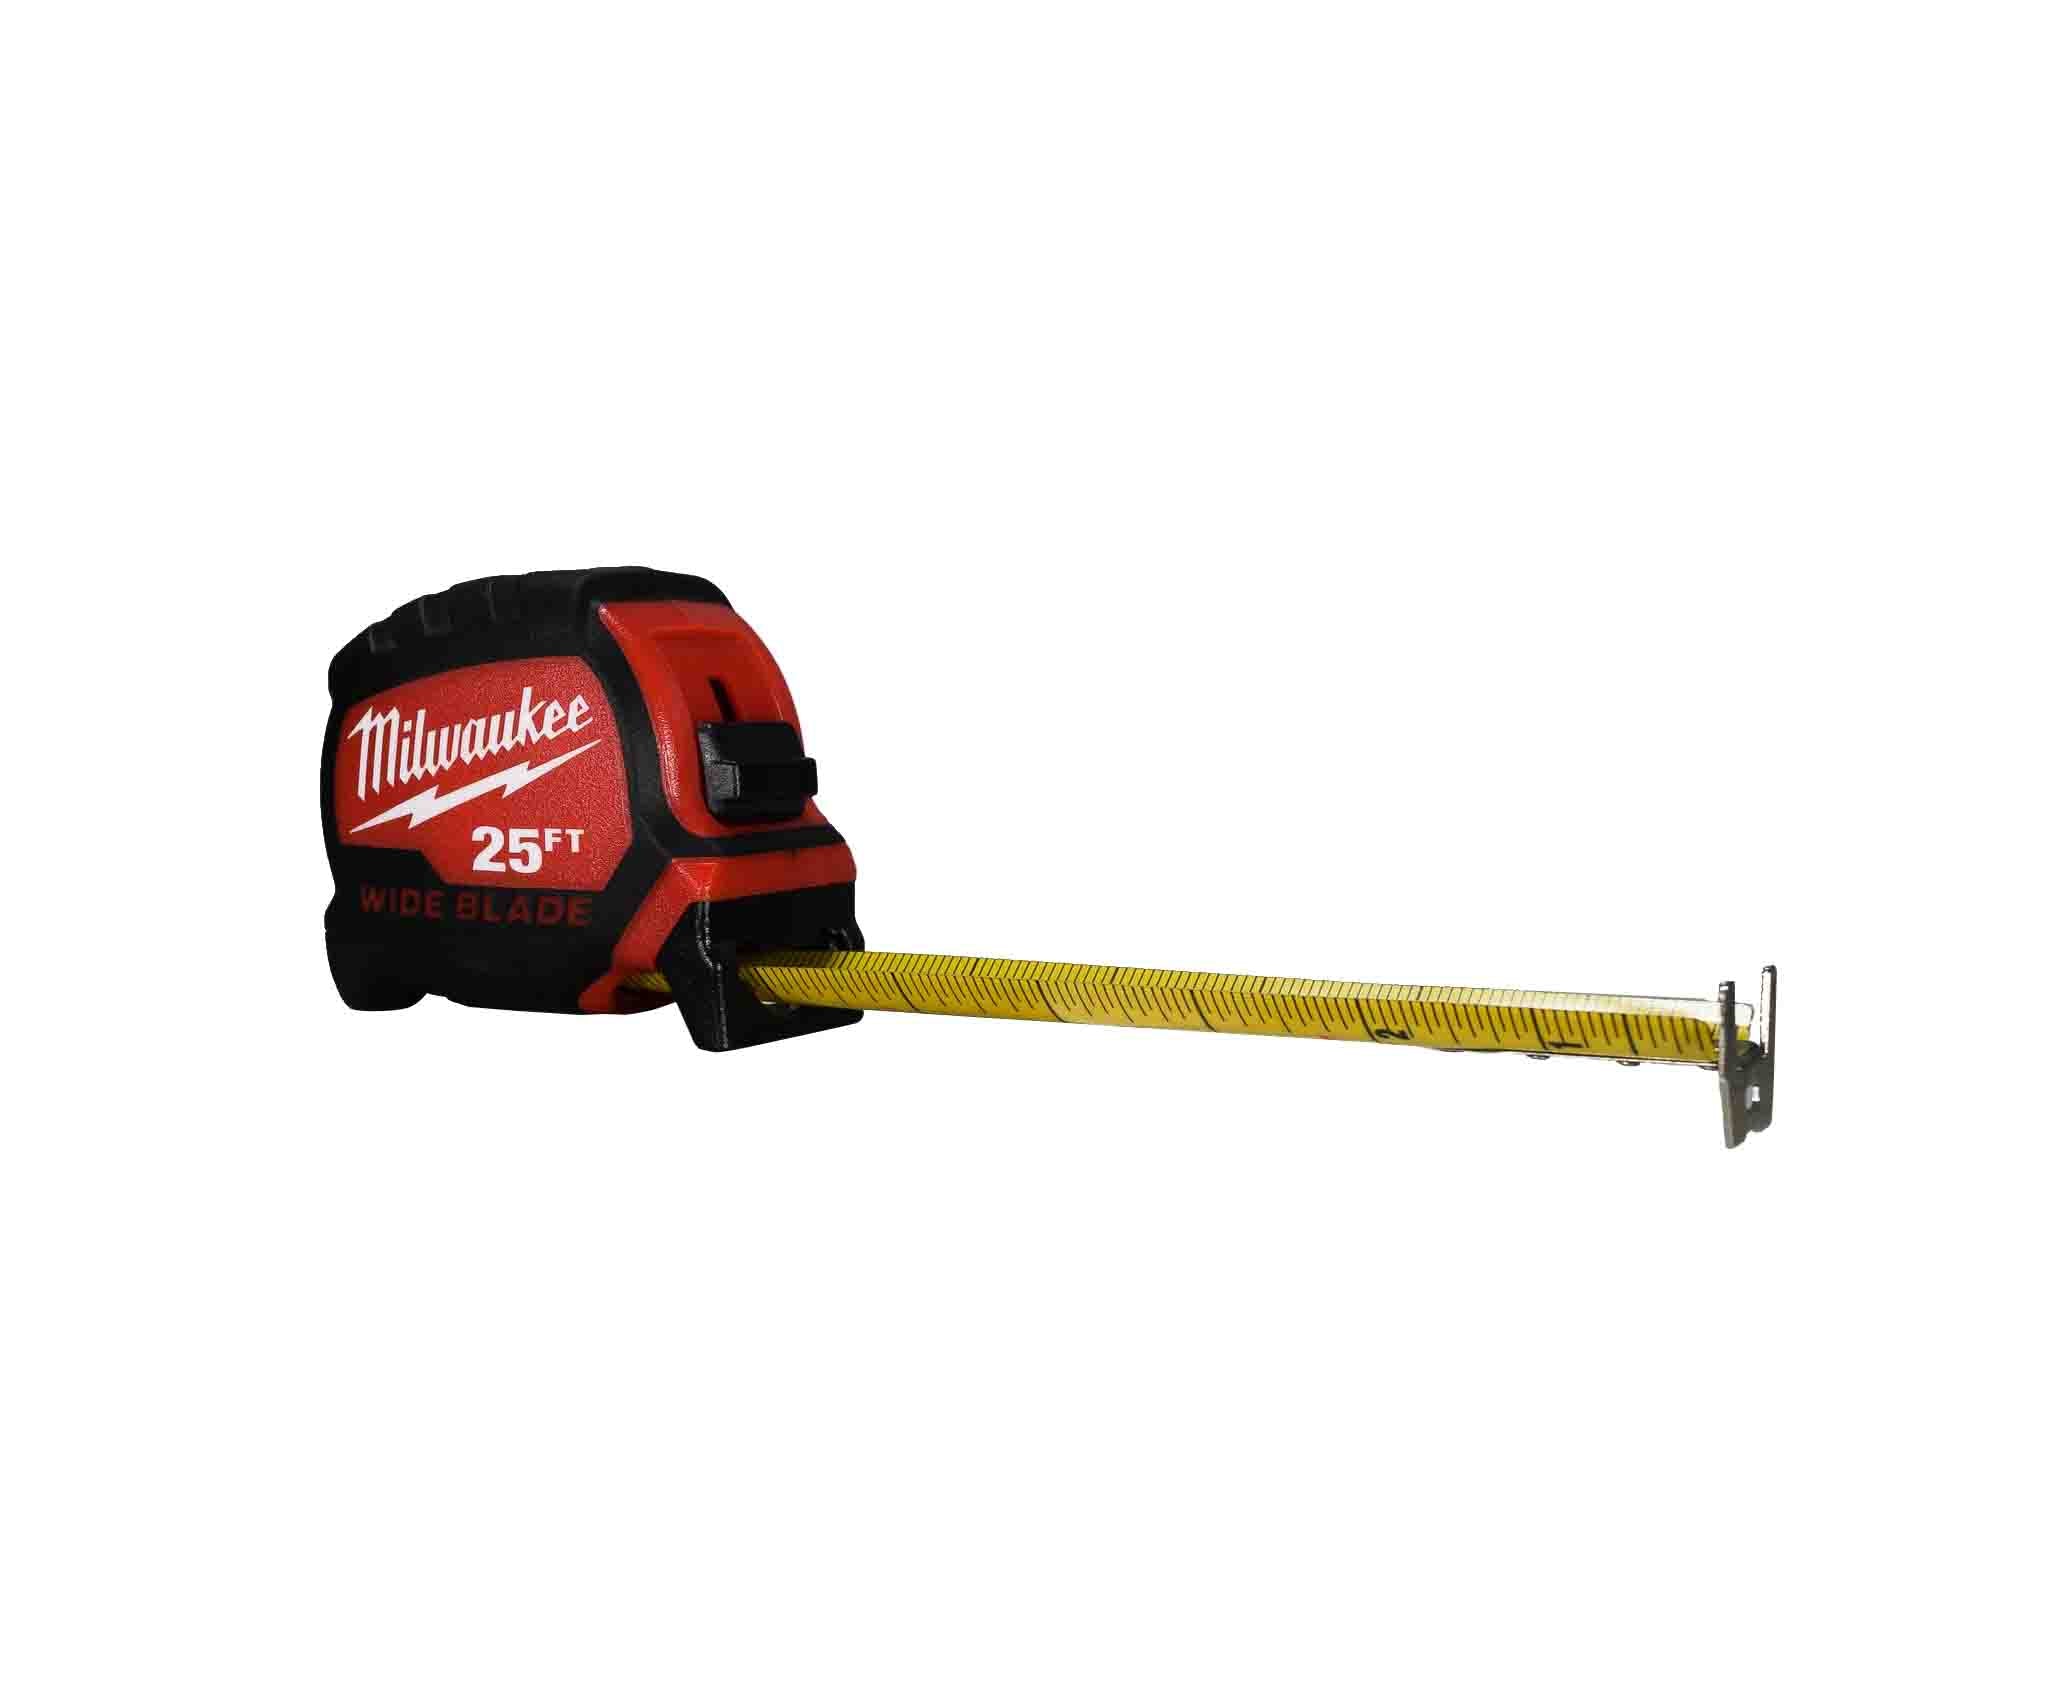 Milwaukee 48-22-0225 25 ft. x 1.3 in. Wide Blade Tape Measure with 17 ft. Reach